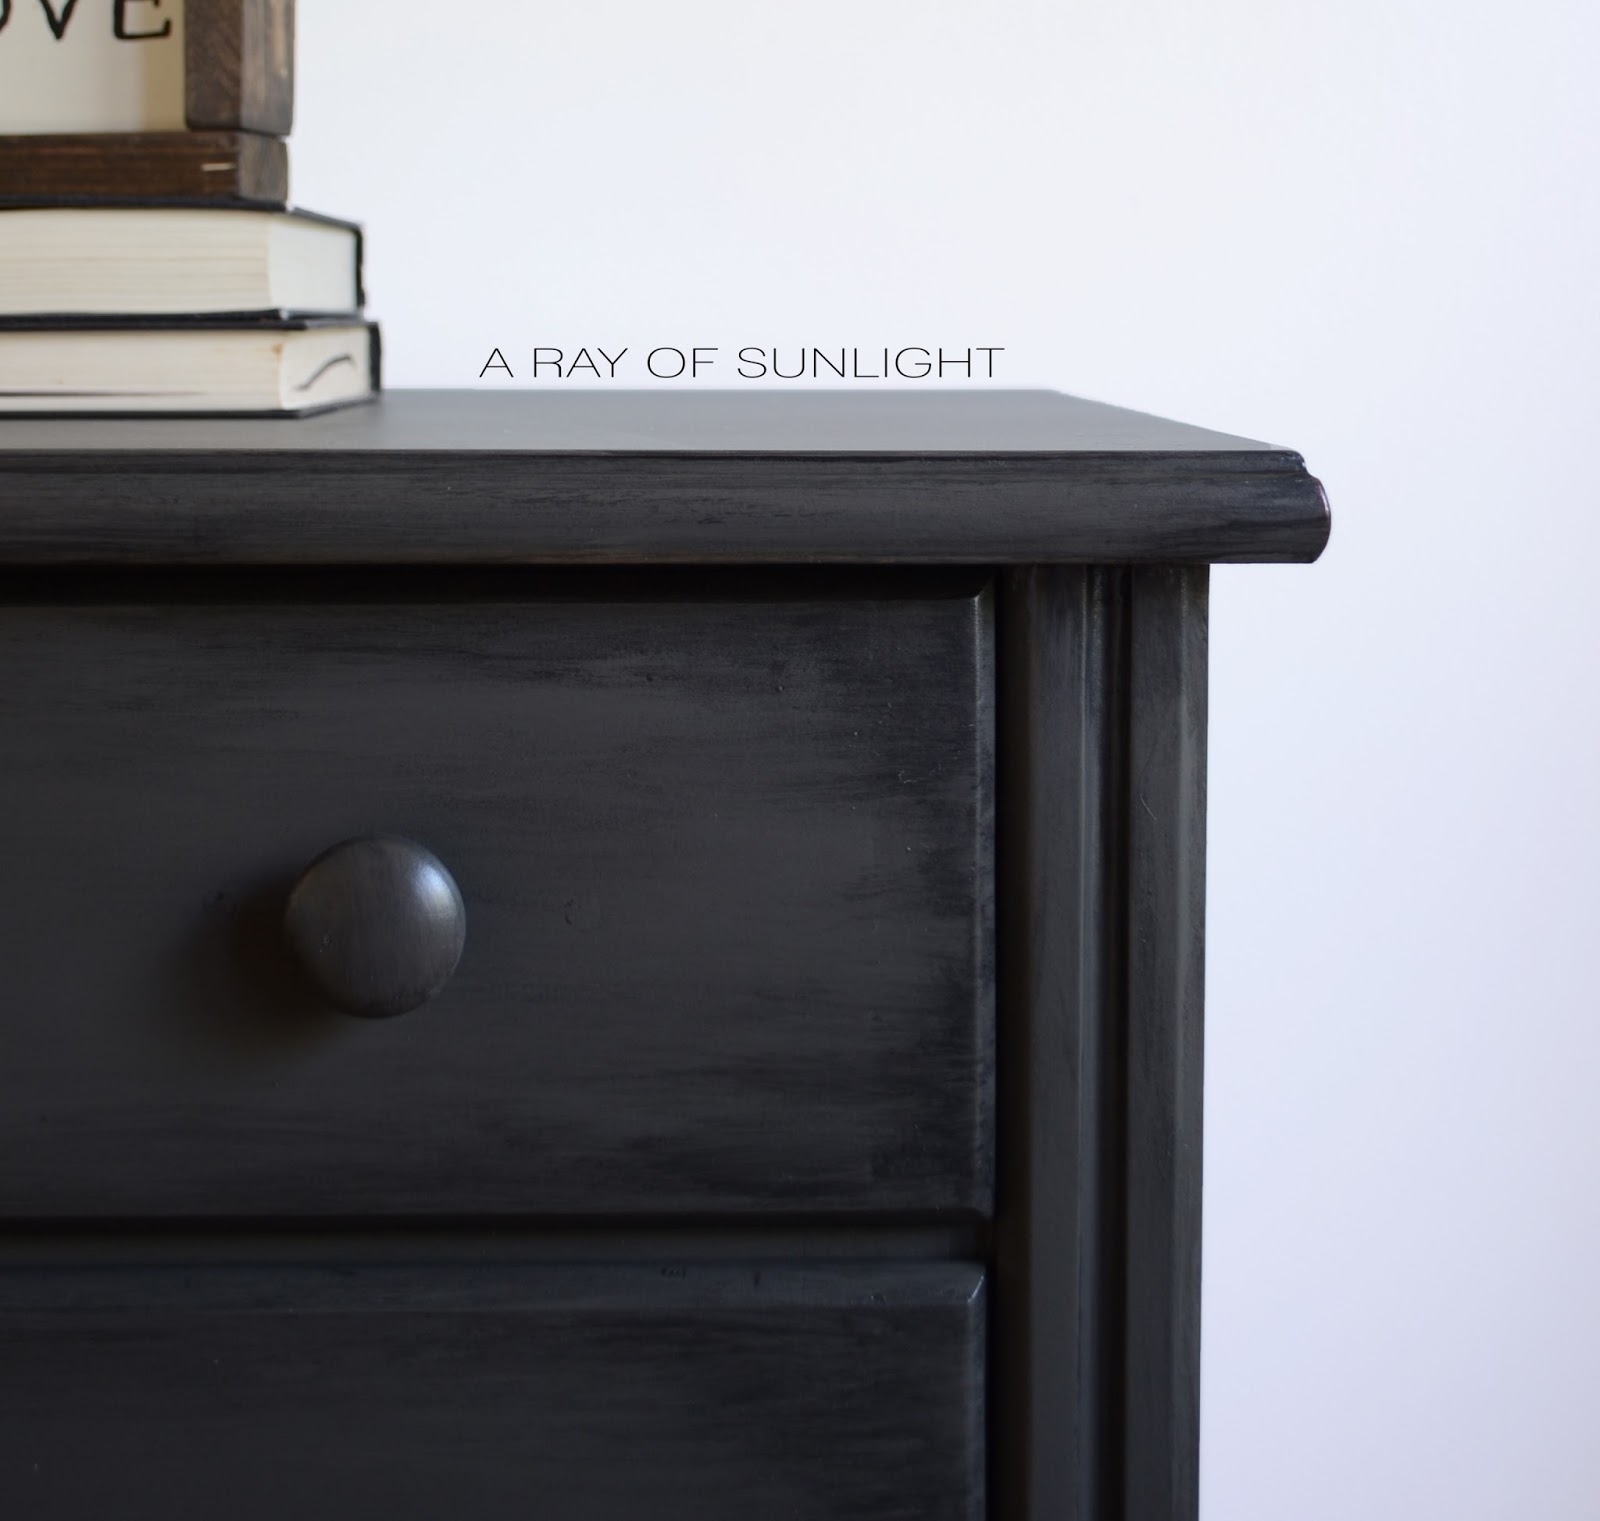 His and hers mismatch grey nightstands or dressers in Urbane Bronze with black antique glazing by A Ray of Sunlight